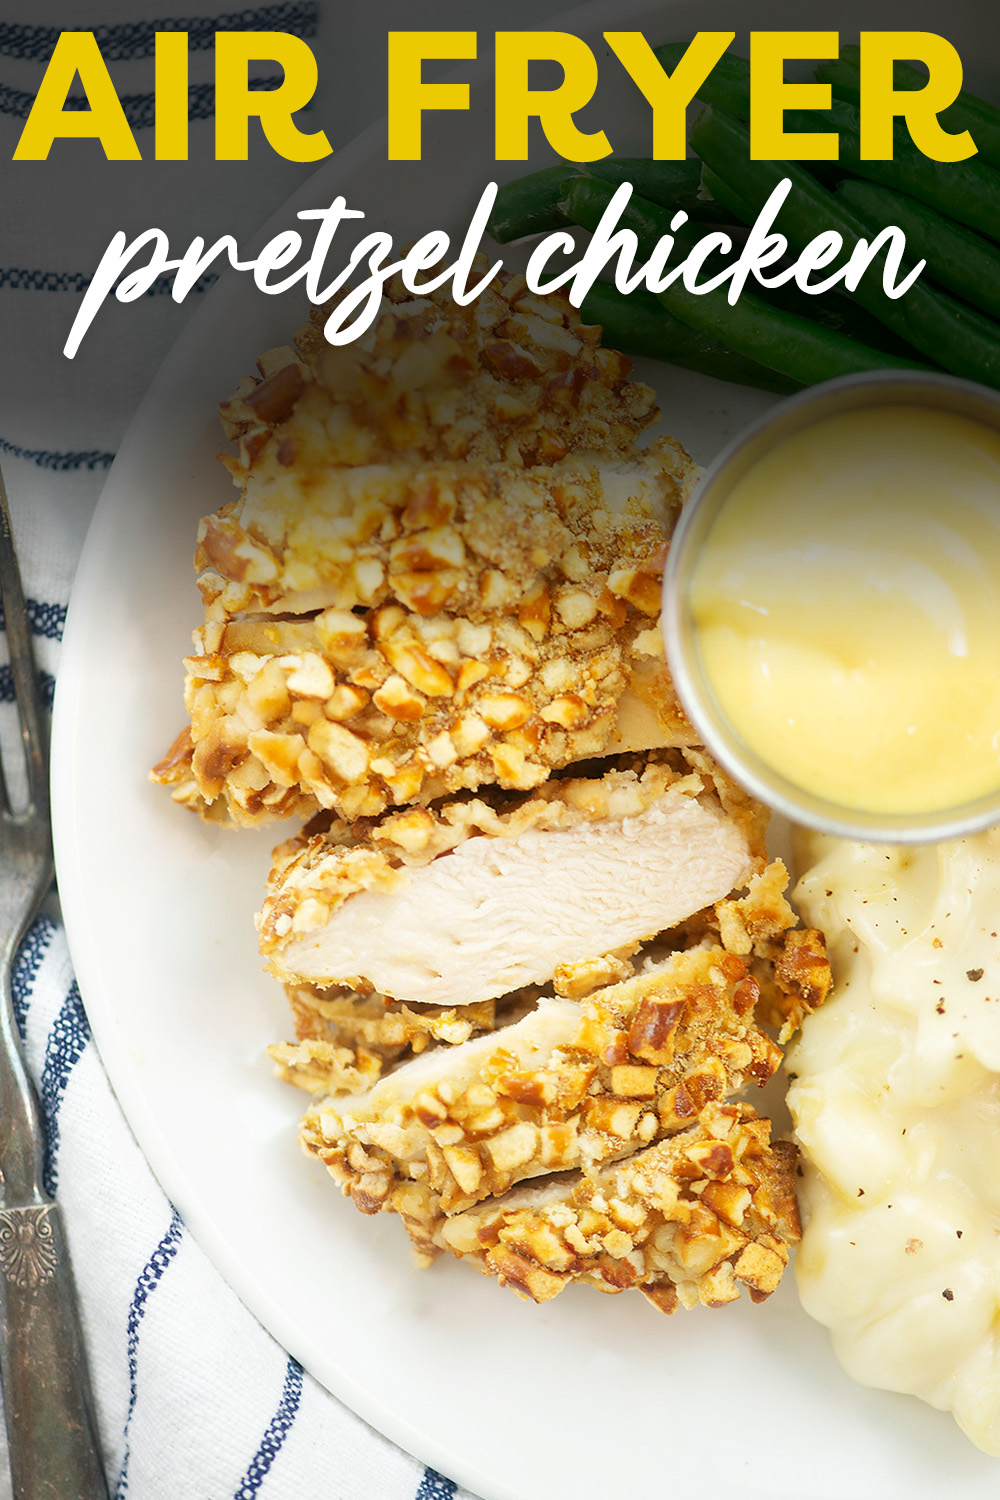 You're going to love our Air Fryer Pretzel Crusted Chicken! This tasty, crunchy combo is seriously good and pairs wonderfully with your favorite honey mustard to dip your chicken.